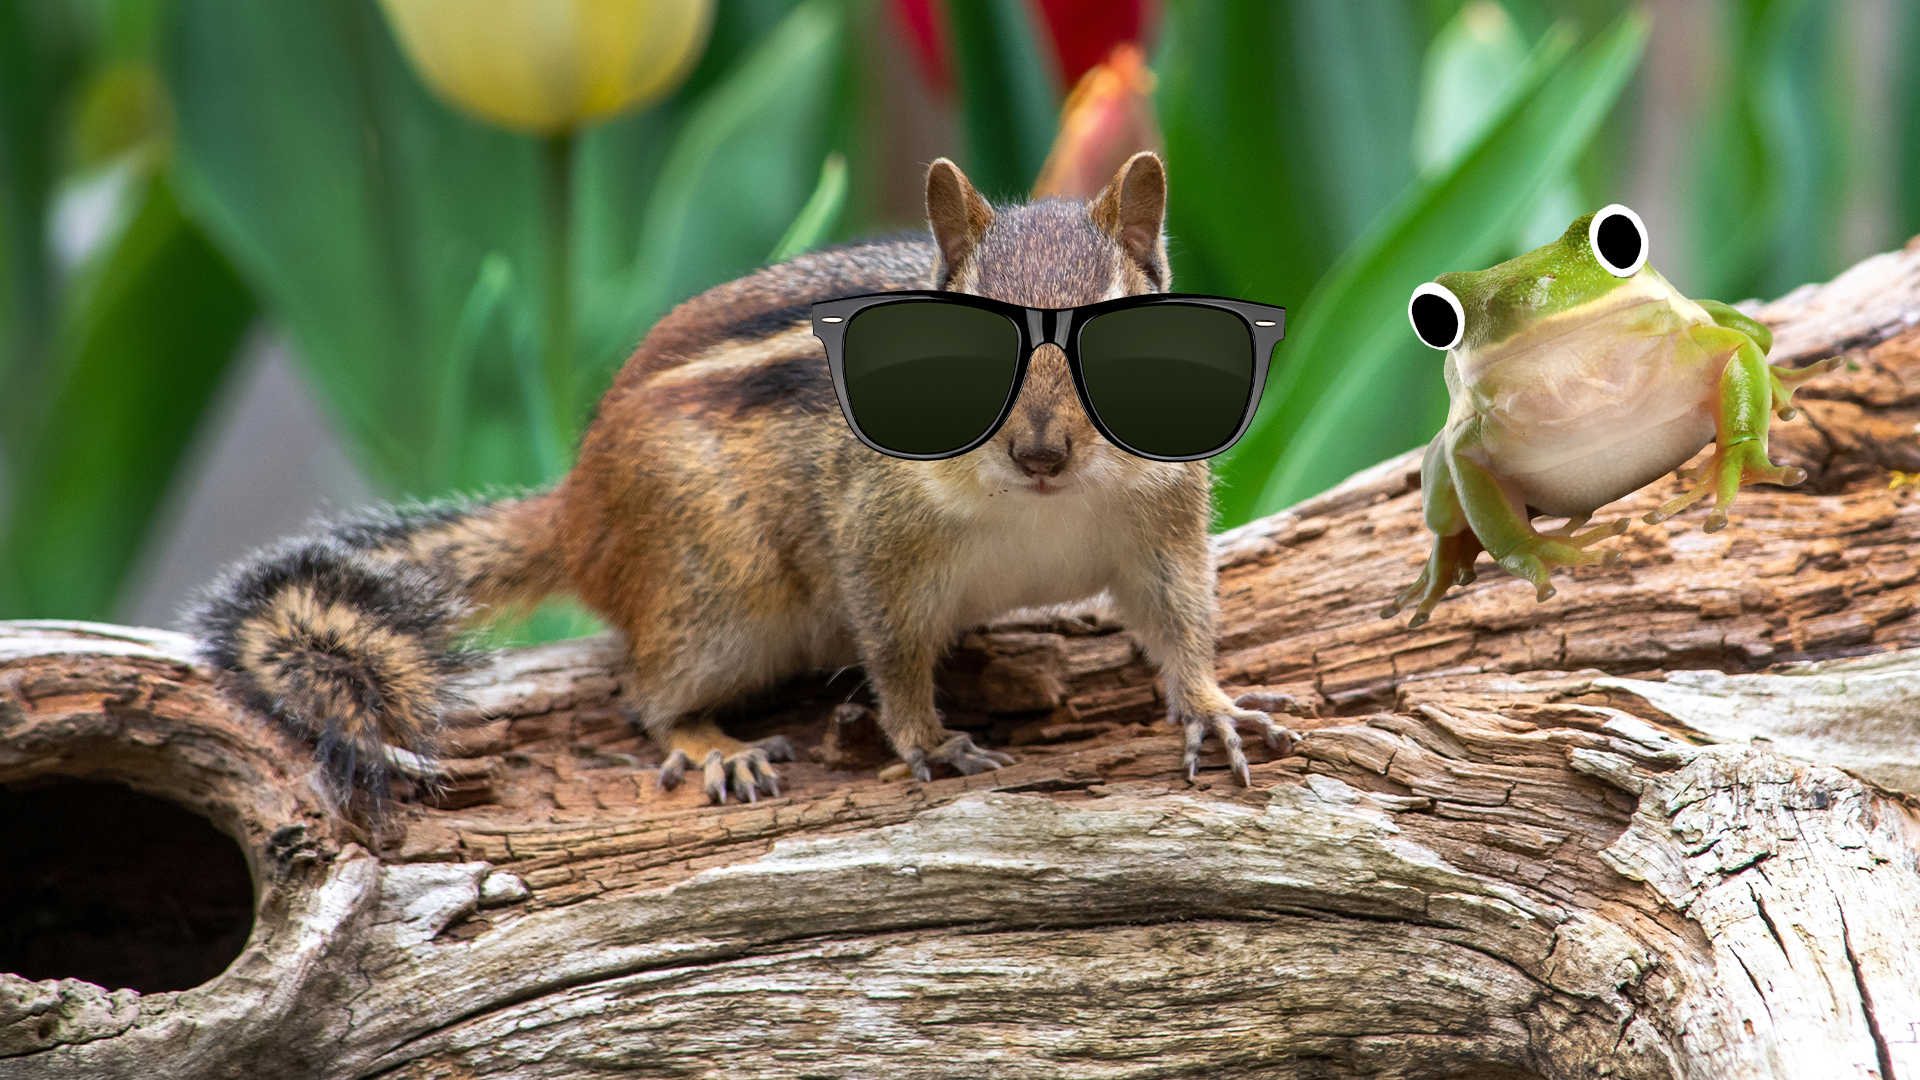 Chipmunk and frog